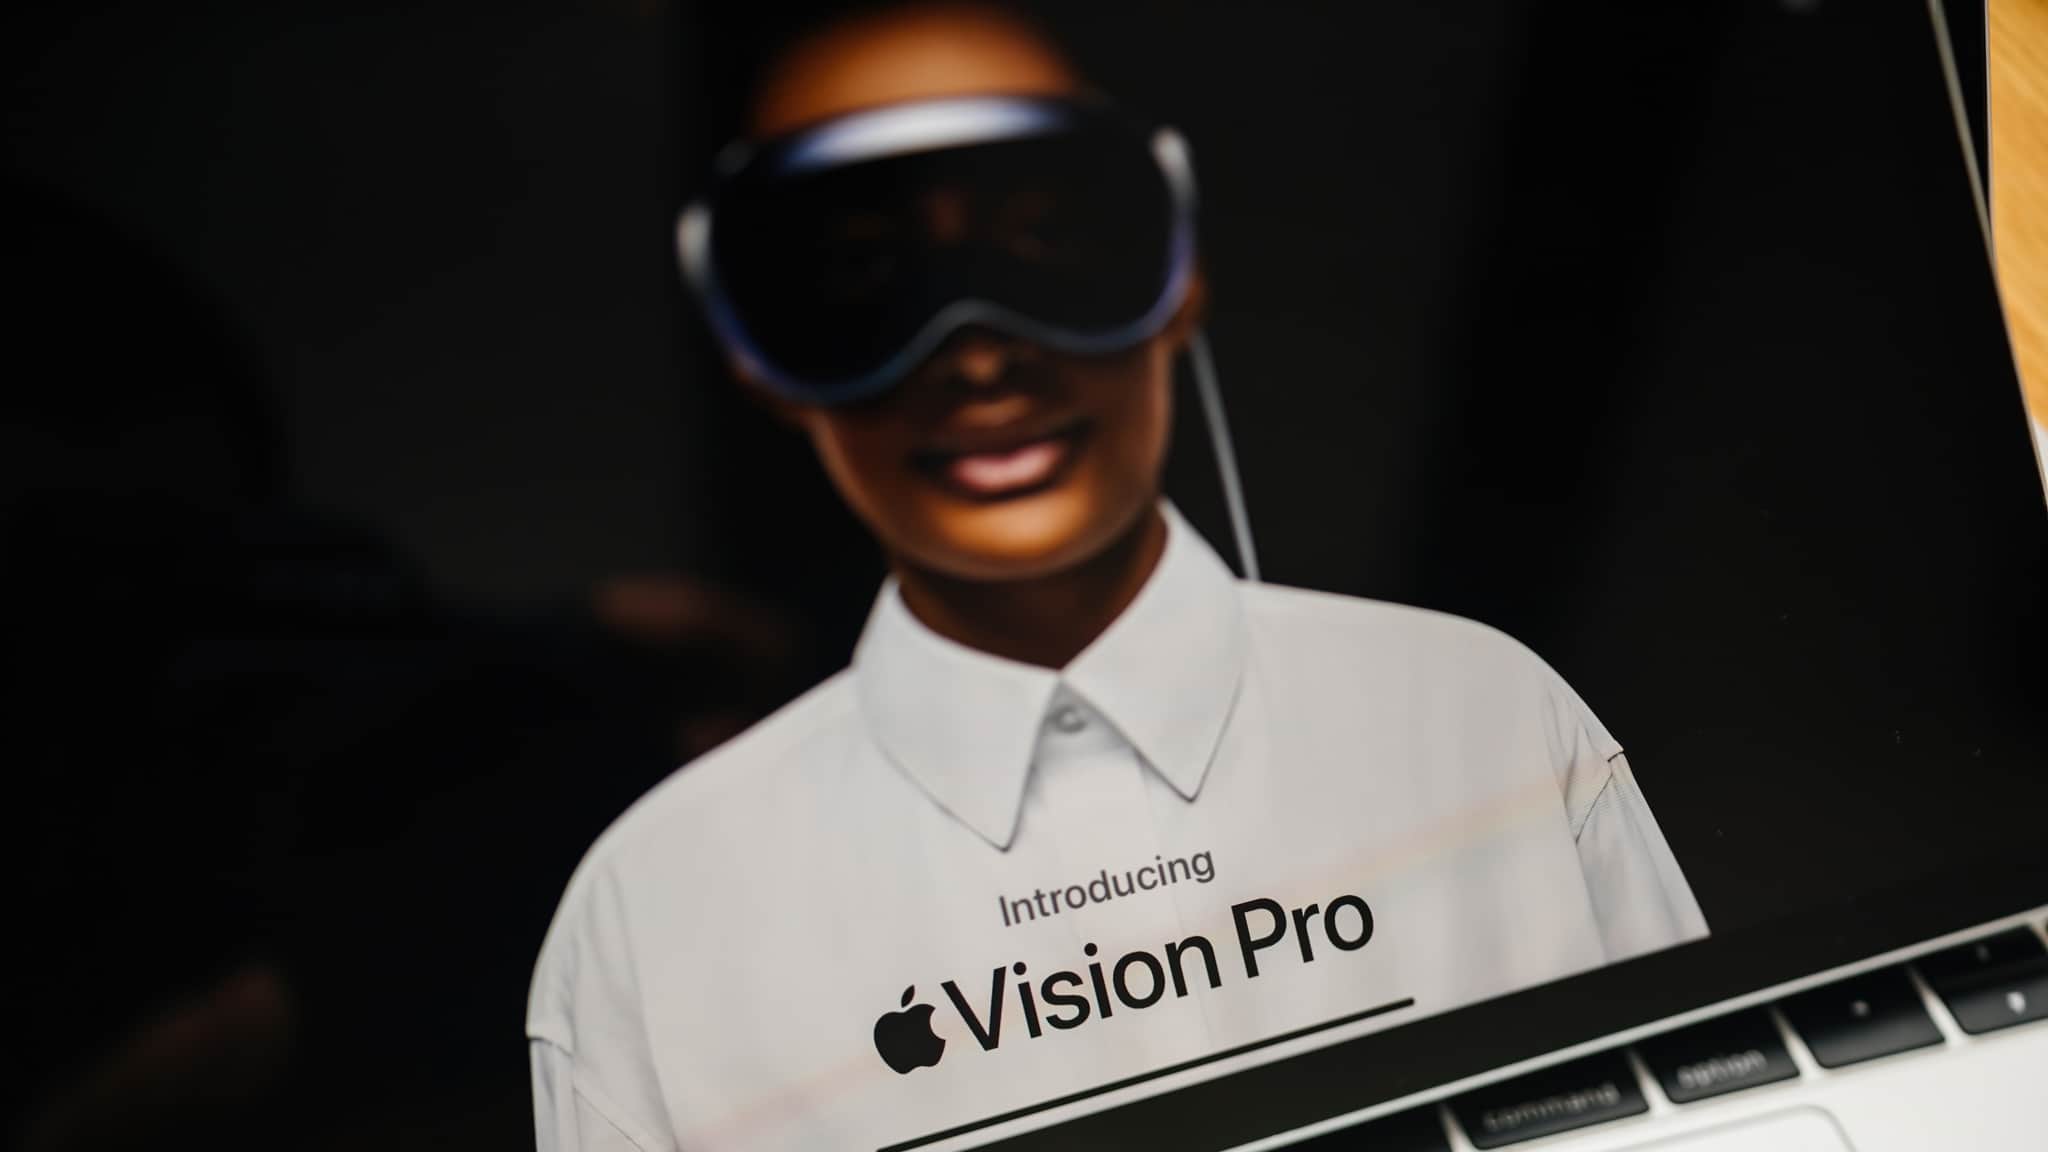 Kuo: Some Concerns Remain As Apple Vision Pro Sells Out